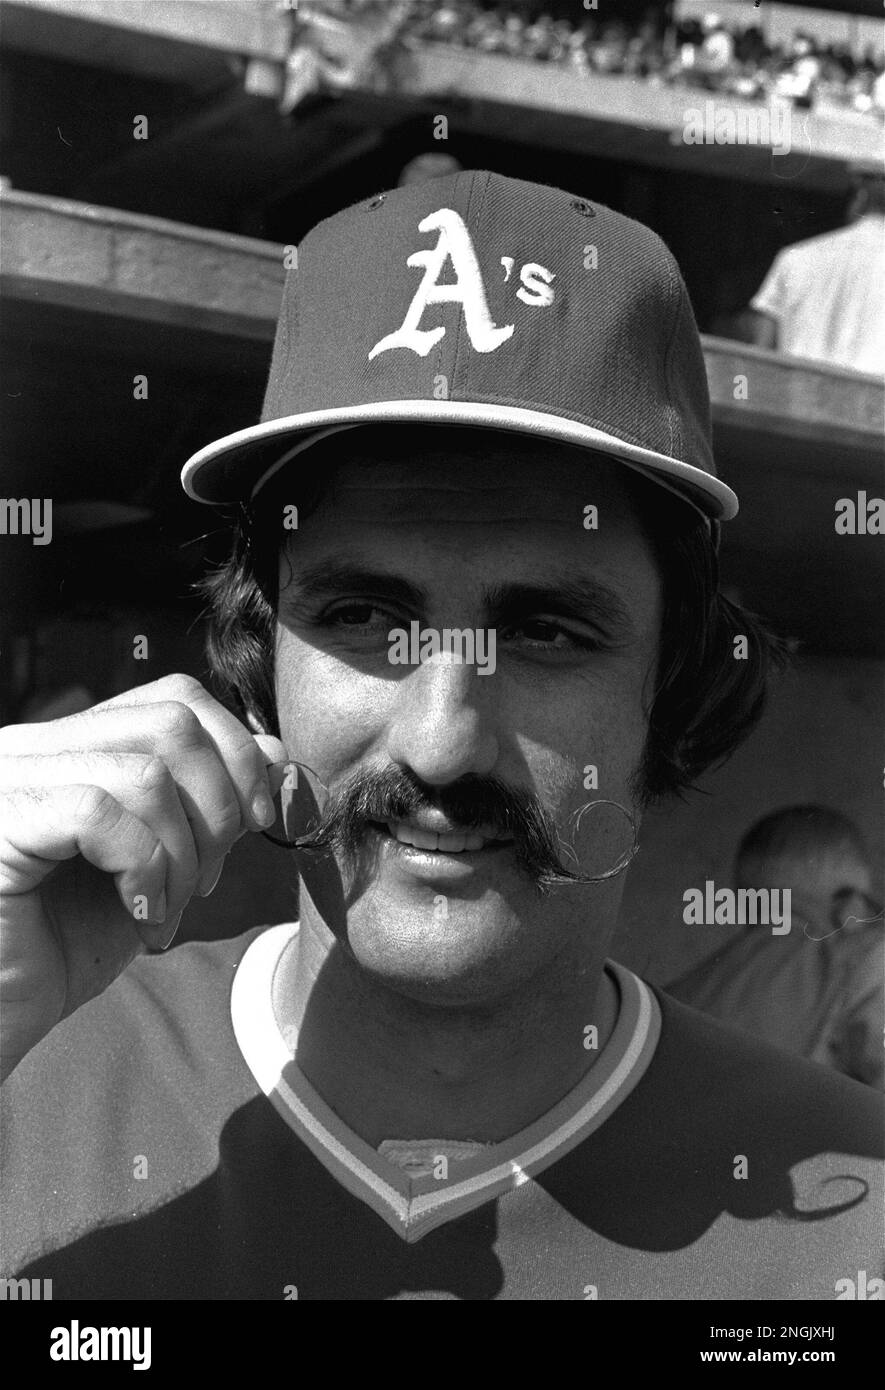 Oakland A's relief pitcher Rollie Fingers fingers his handlebar mustache in  Oakland, California, Saturday, October 15, 1973. Many of his teammates  boast facial foliage, but none compares with Fingers' finely waxed lip